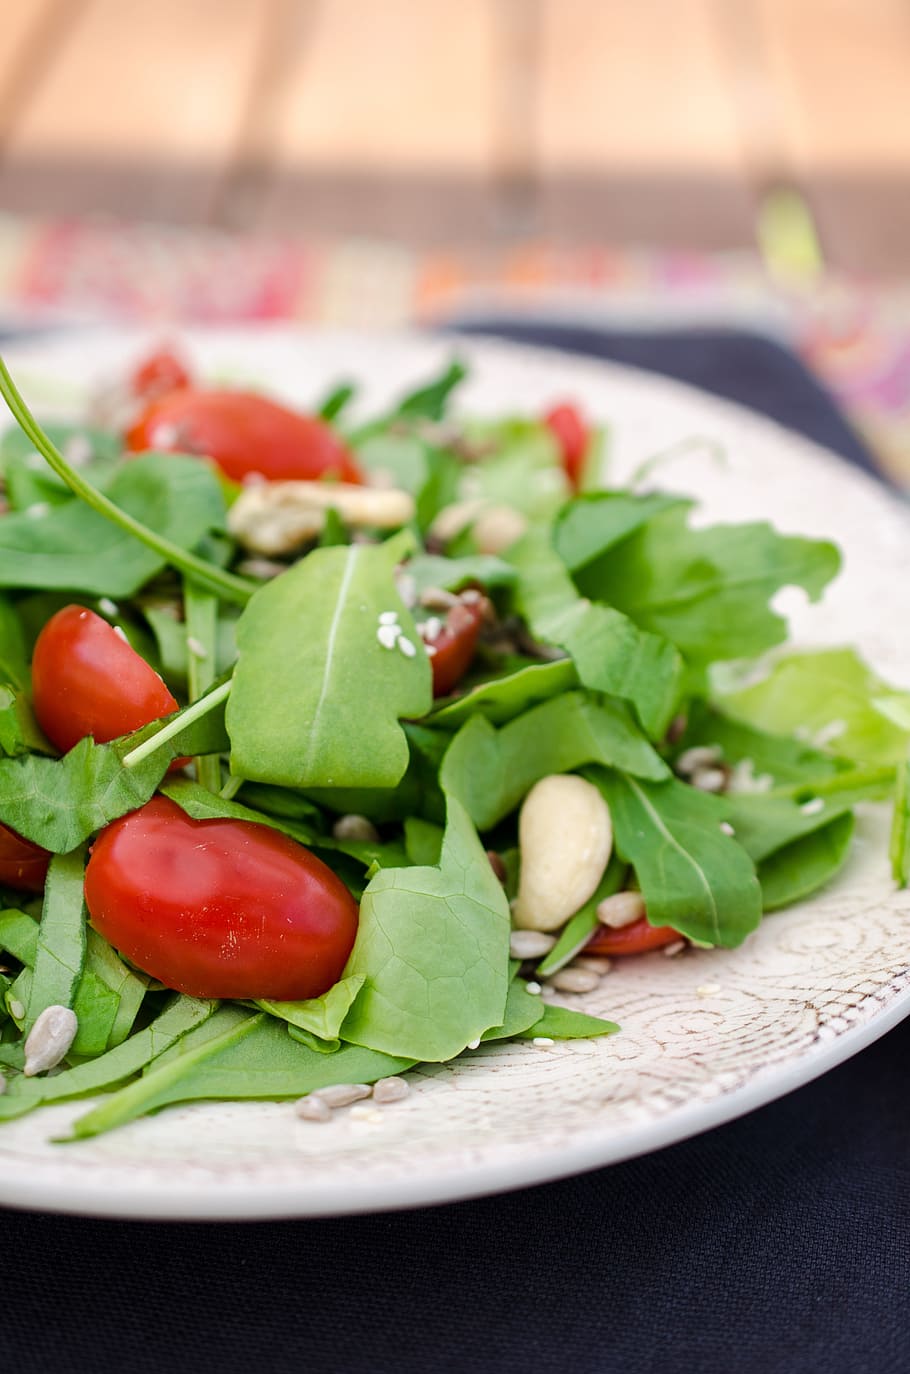 arugula, baby spinach, red, basil, vegetable, food and drink, healthy eating, food, wellbeing, freshness